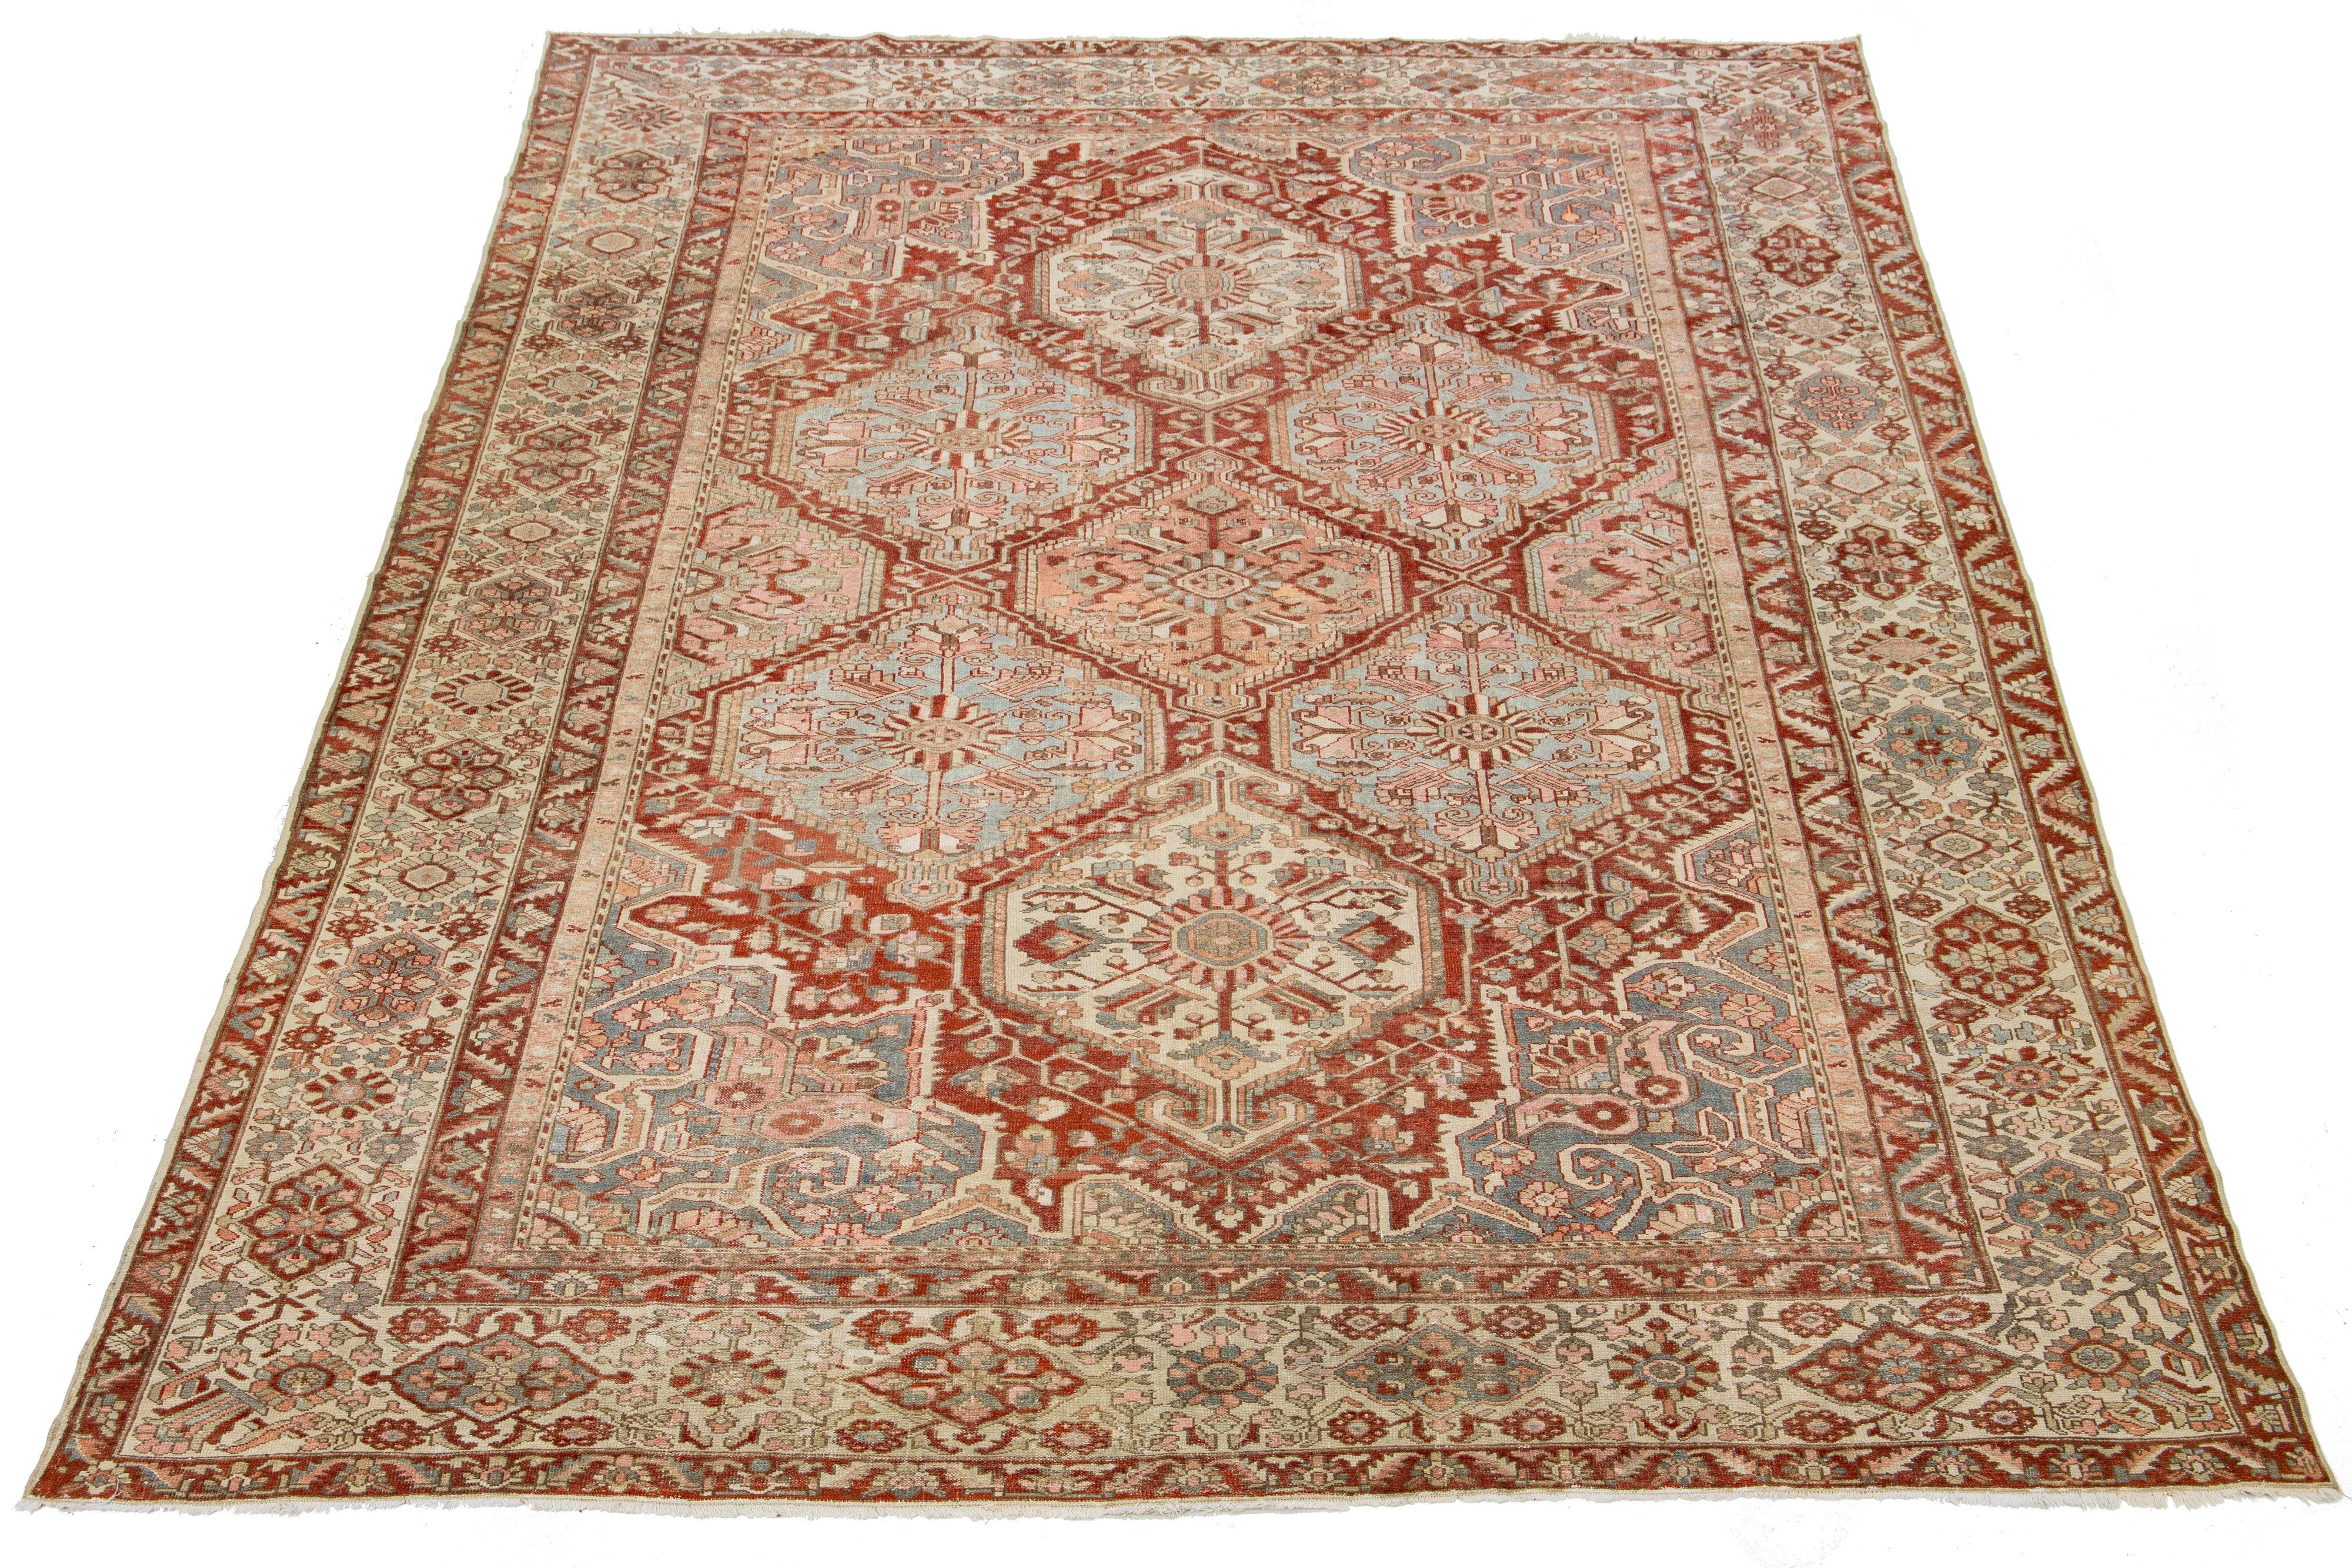 Beautiful Antique Bakhtiari hand-knotted wool rug with a red-rust color field. This Persian piece has a classic blue, beige, and pink Tribal floral design.

This rug measures 11'8